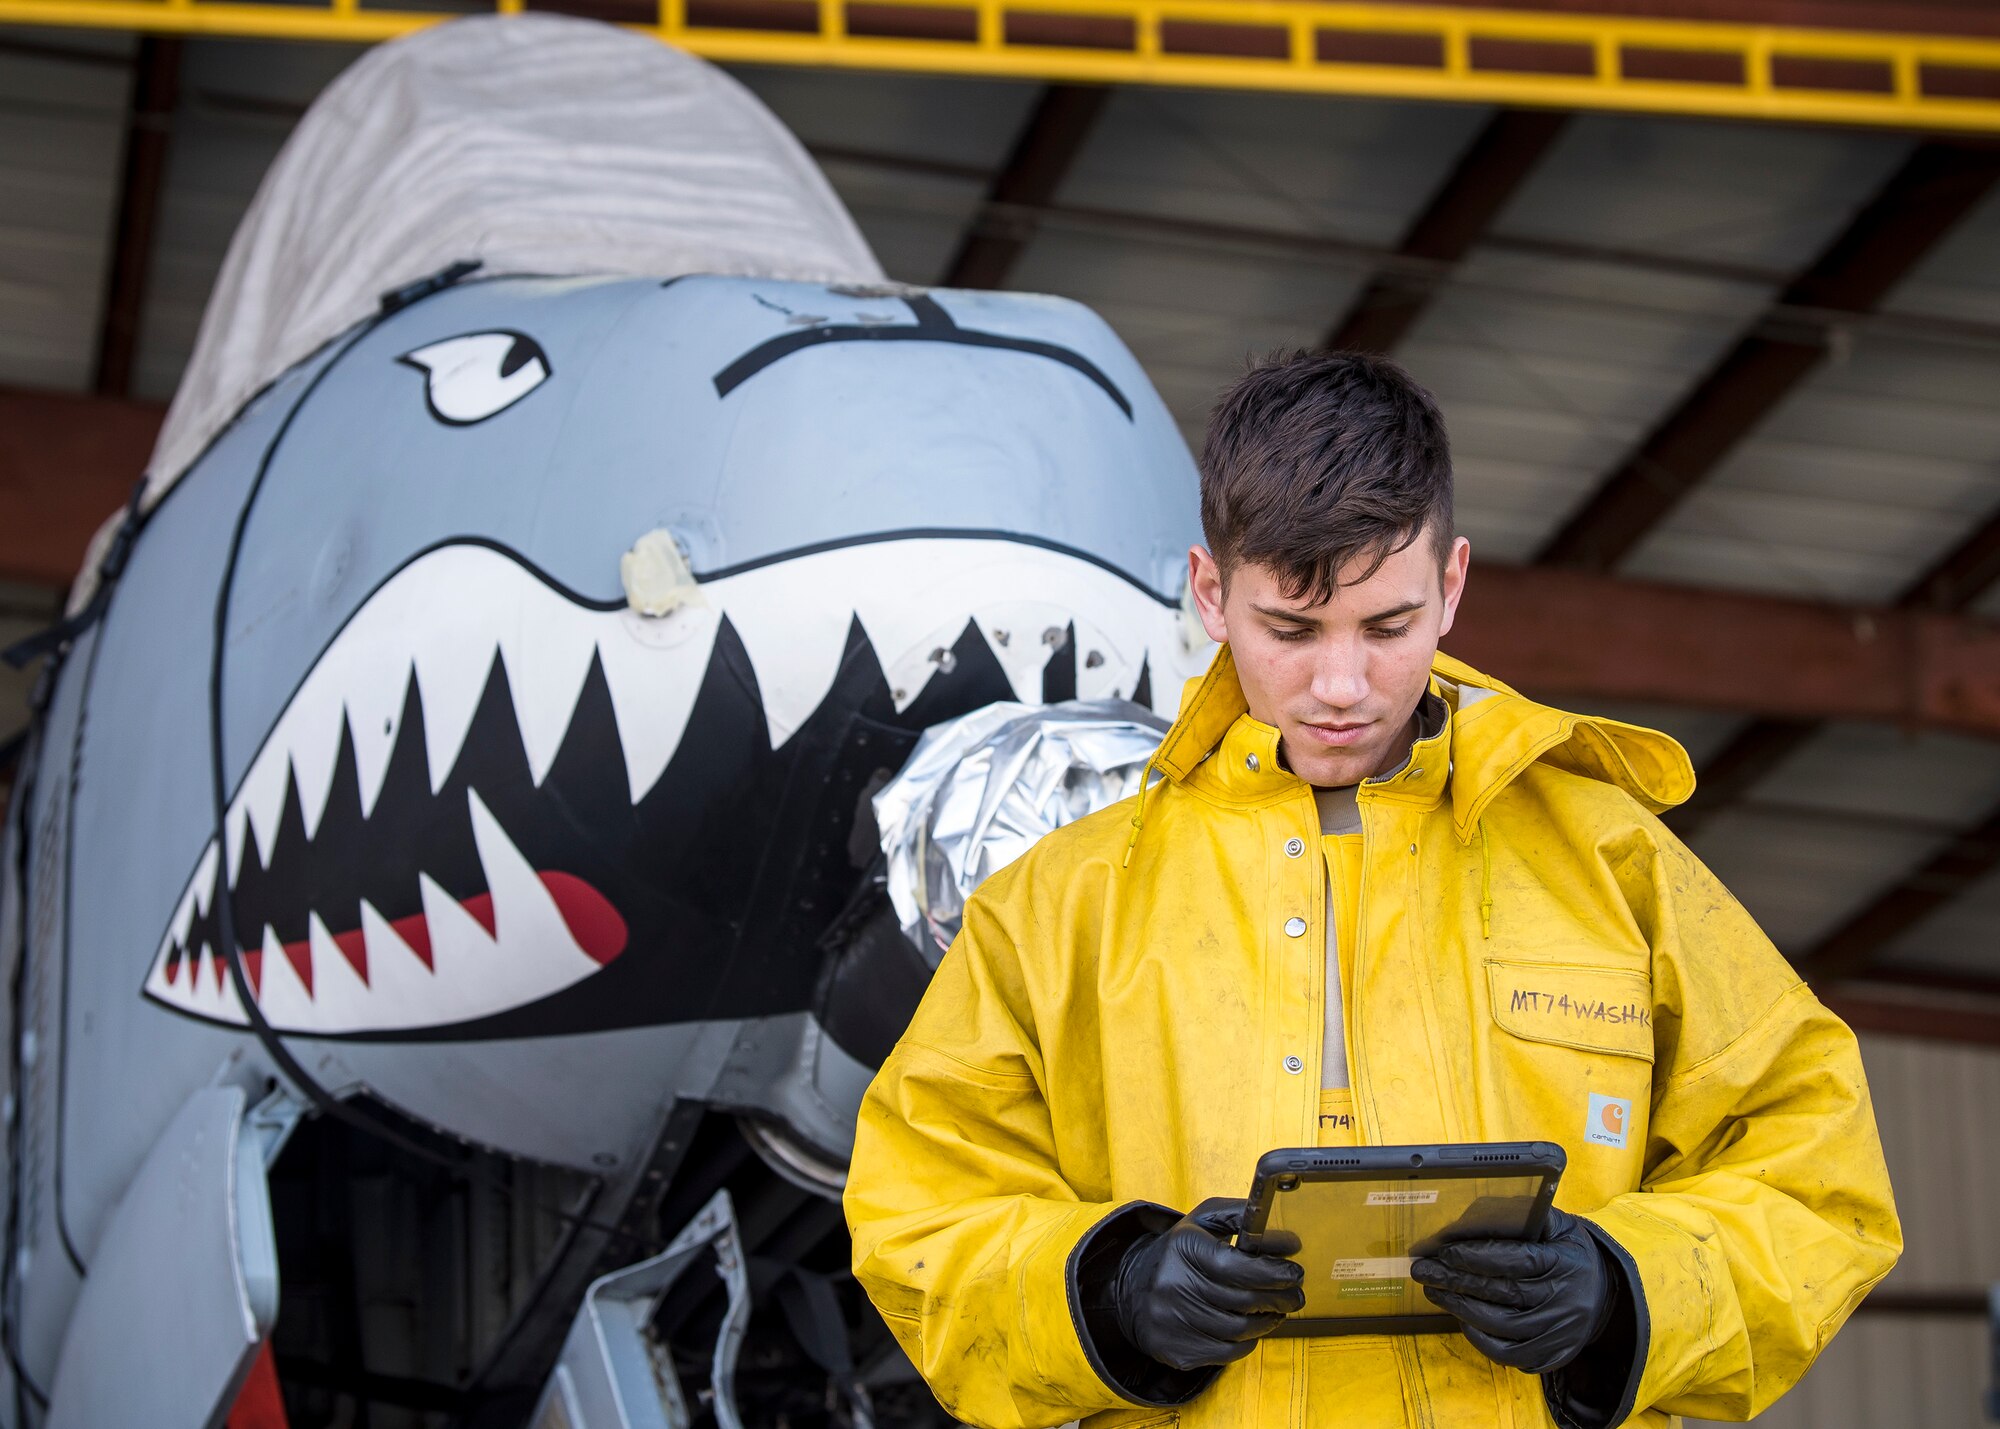 Airman 1st Class Benjamin Jones, 74th Aircraft Maintenance Unit crew chief, reads a technical order, Feb. 25, 2019, at Moody Air Force Base, Ga. To guarantee Moody’s fleet of 49 A-10C Thunderbolt II’s are in peak warfighting condition, Airmen from the 23d Maintenance Group dedicated over 10 hours washing the A-10 to ensure the aircraft is free of any surface or structural deficiencies that could present a safety hazard during flight. (U.S. Air Force photo by Airman 1st Class Eugene Oliver)